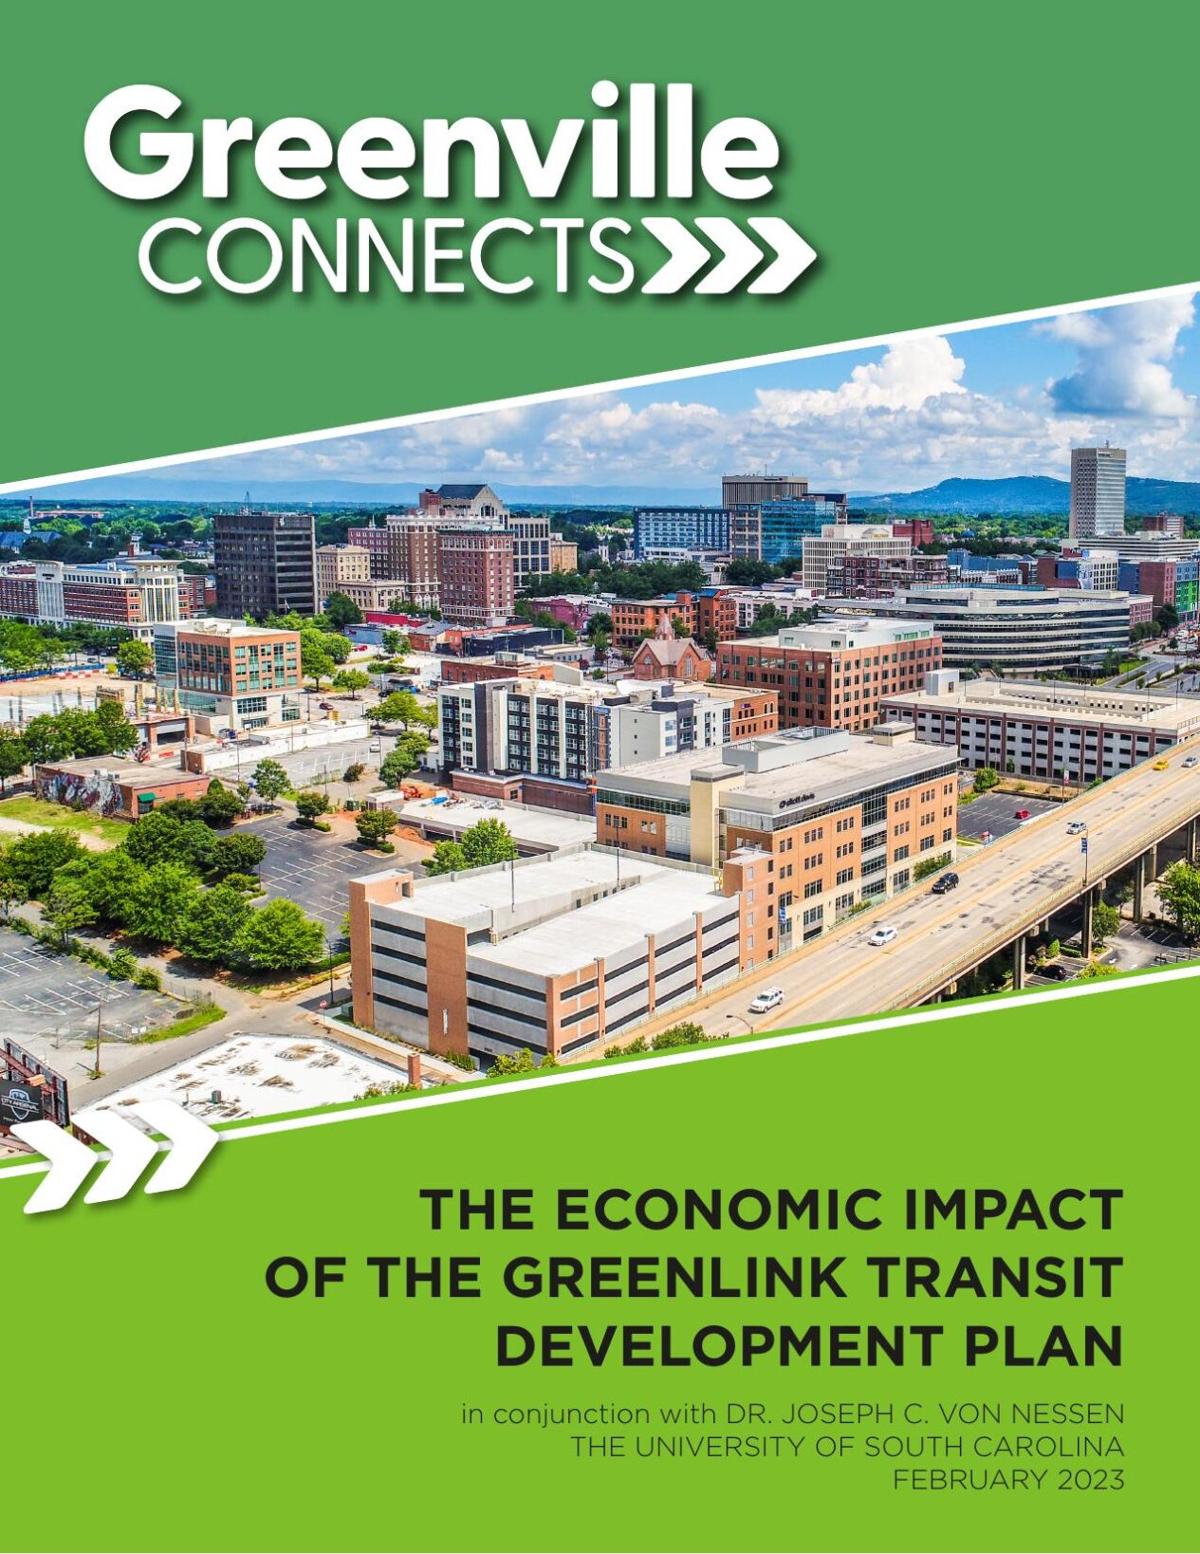 Greenlink Connects study